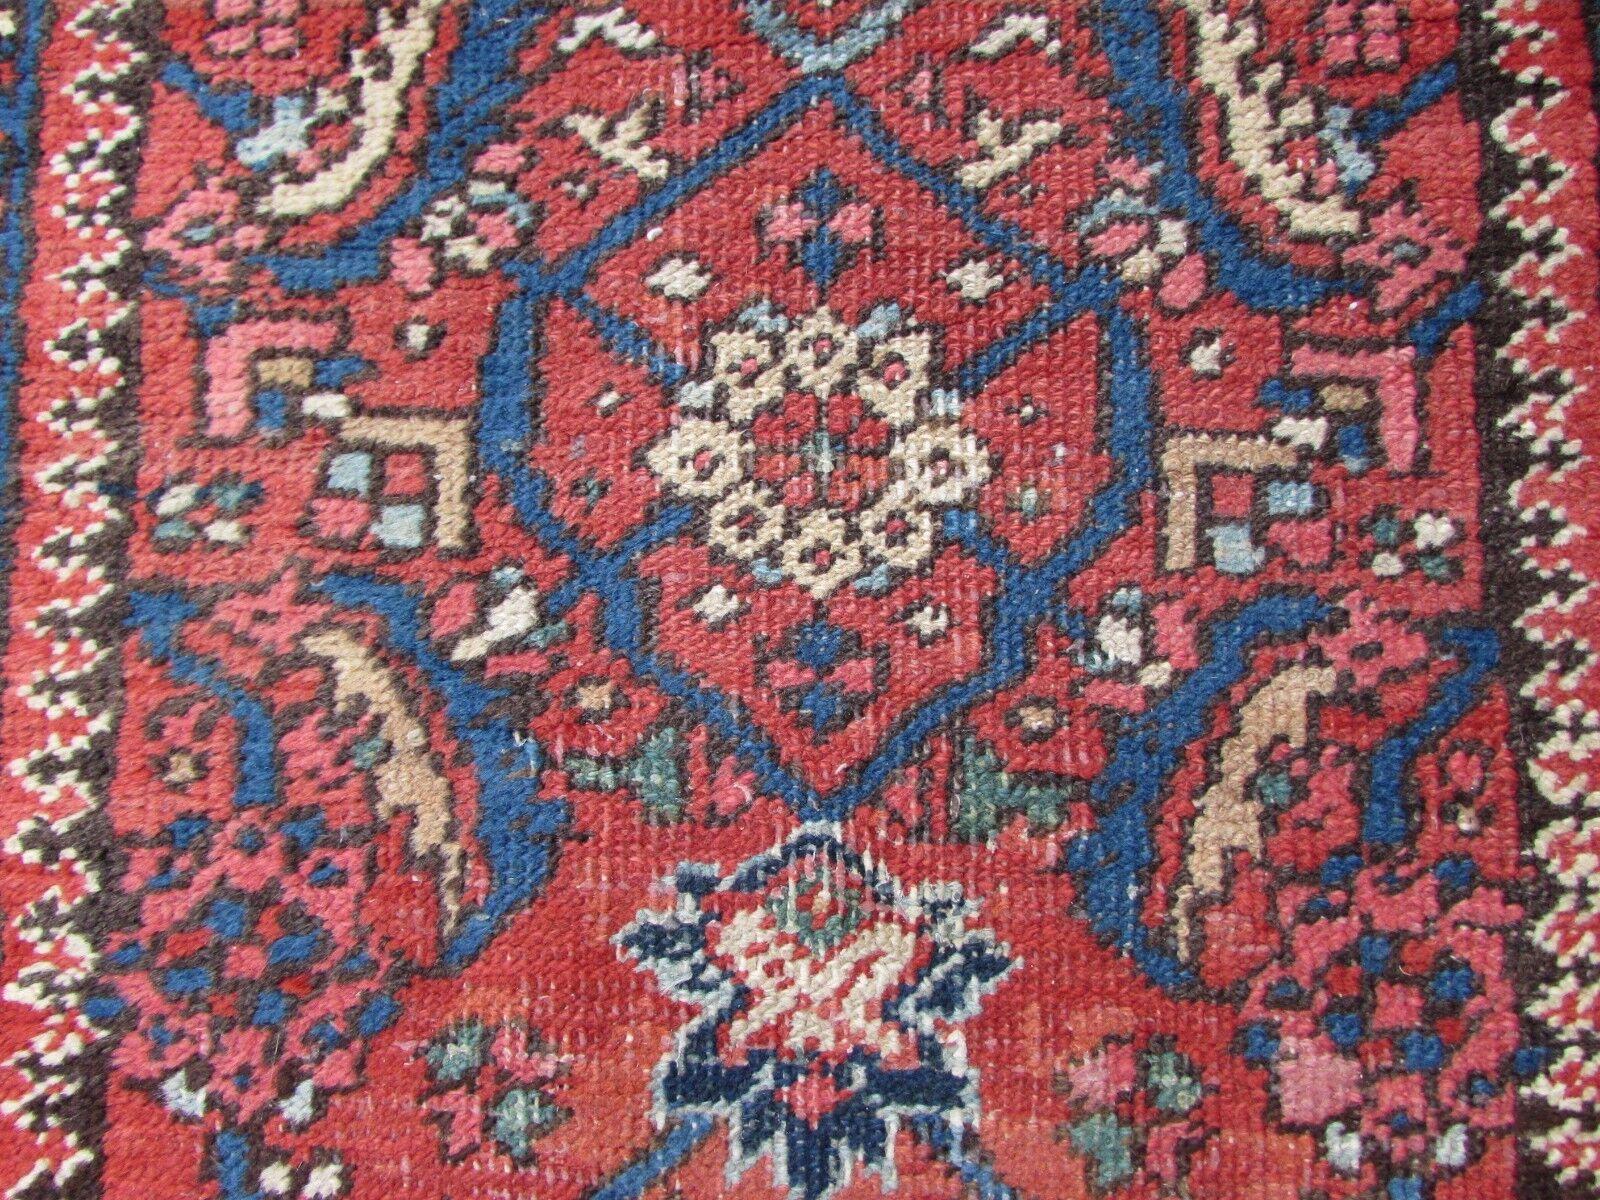 Early 20th Century Handmade Antique Persian Style Mahal Runner Rug 2.5' x 12.1', 1920s, 1Q57 For Sale